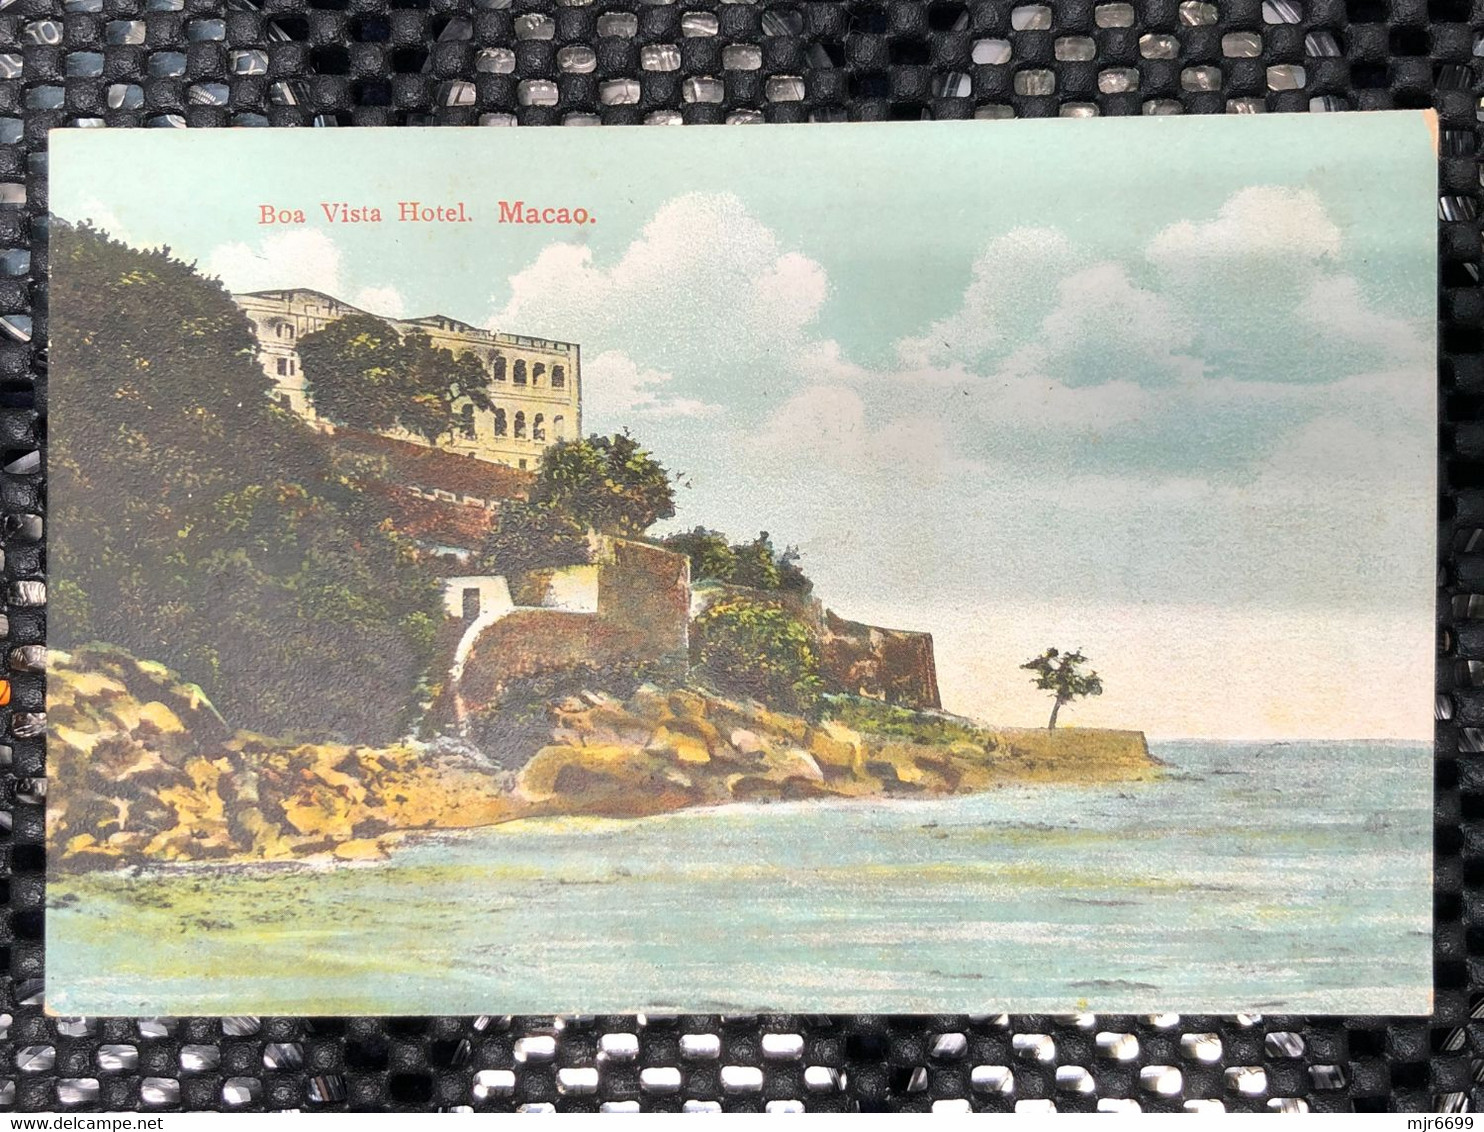 MACAU 19 CENTUARY  PICTURE POST CARD - VIEW OF BOA VISTA HOTEL IN COLOUR - TODAY PORTUGAL EMBASSY RESIDENCE - Macao